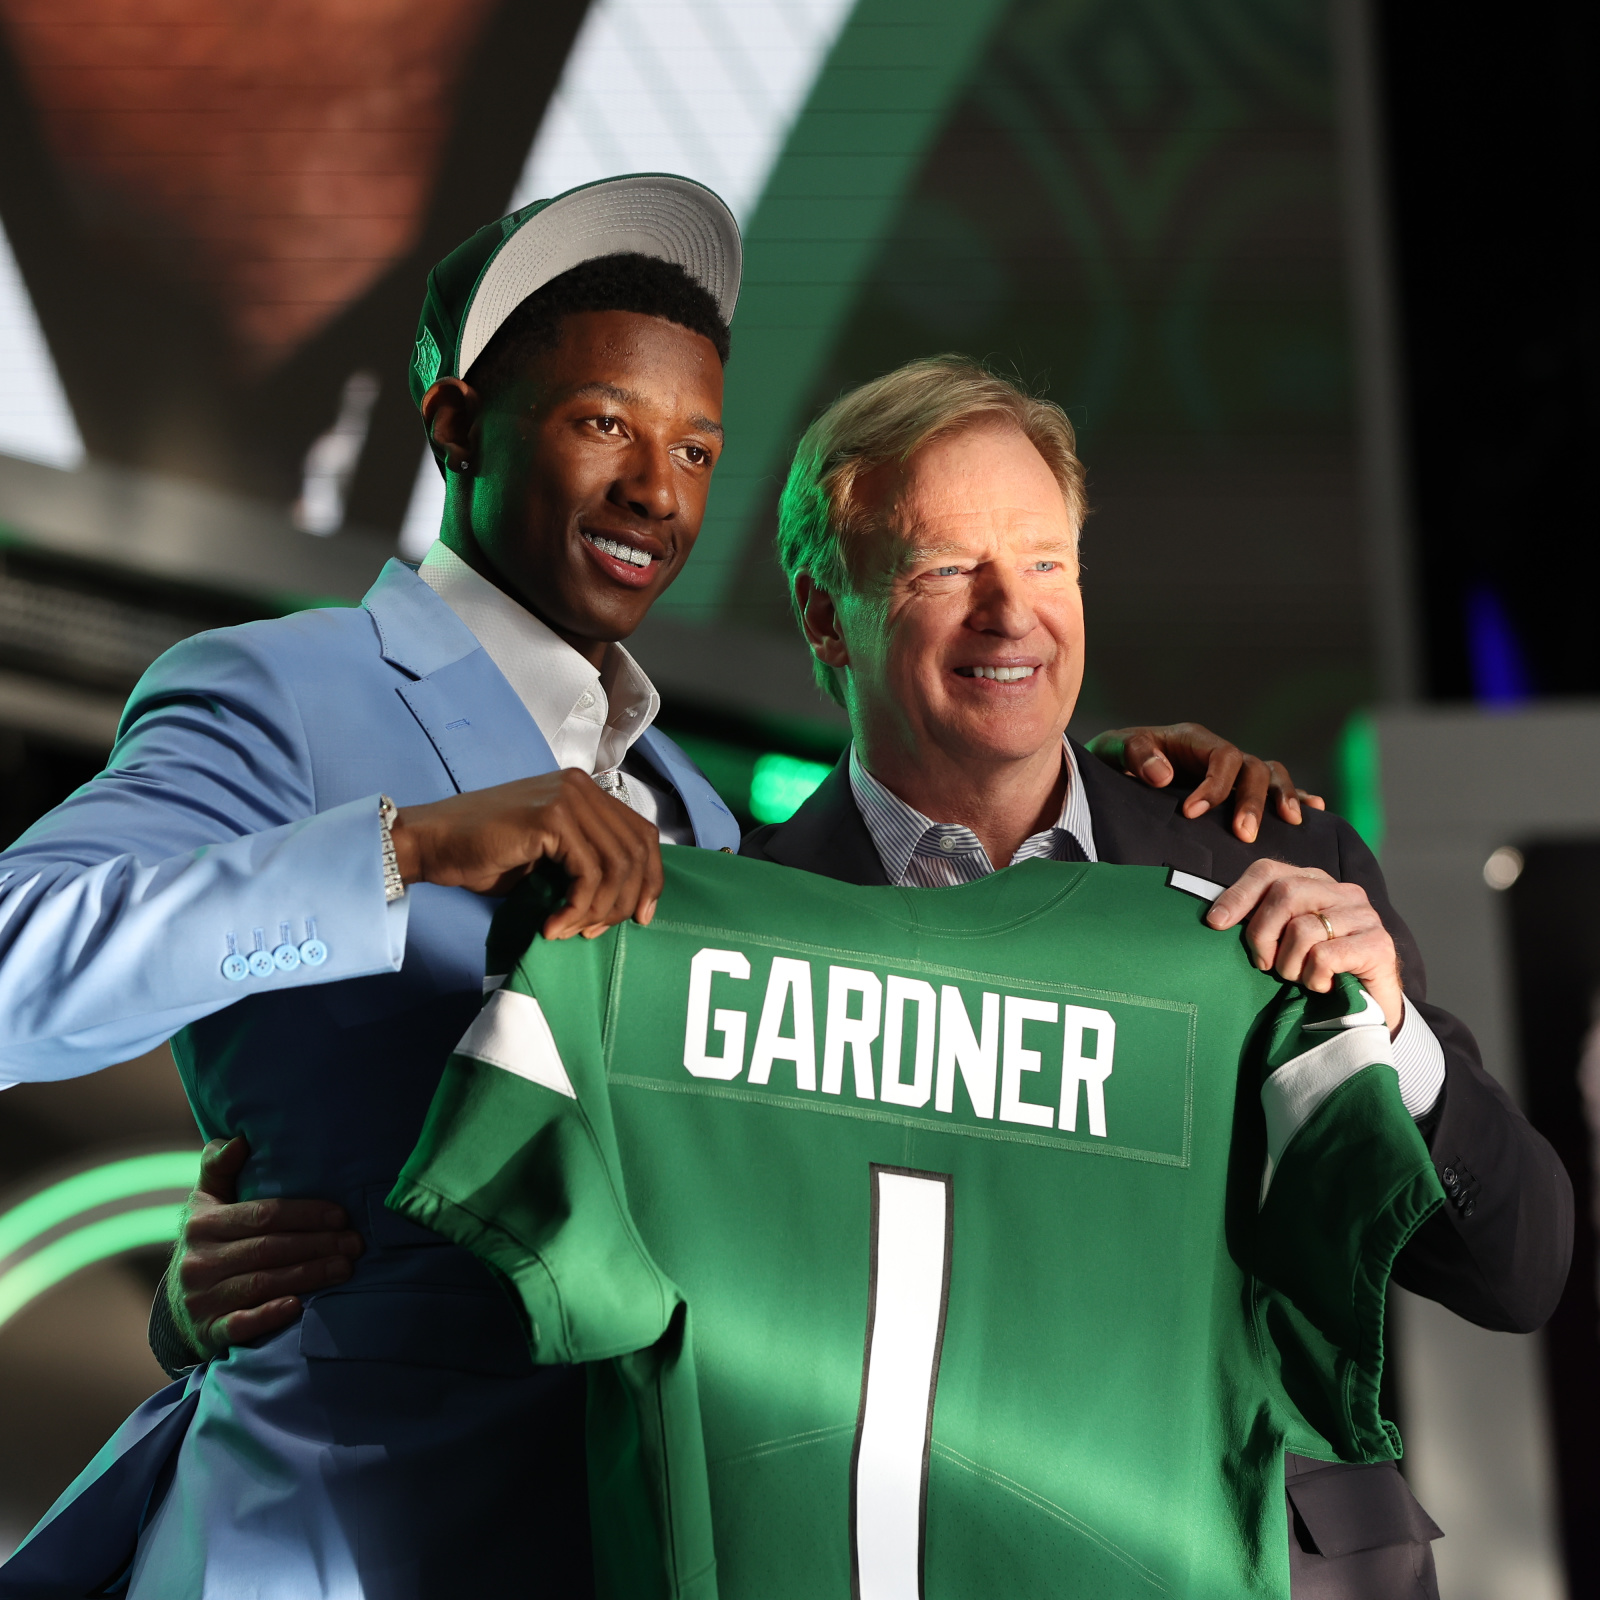 Sauce Gardner paid $50,000 to D.J. Reed to wear No. 1 jersey - NBC Sports